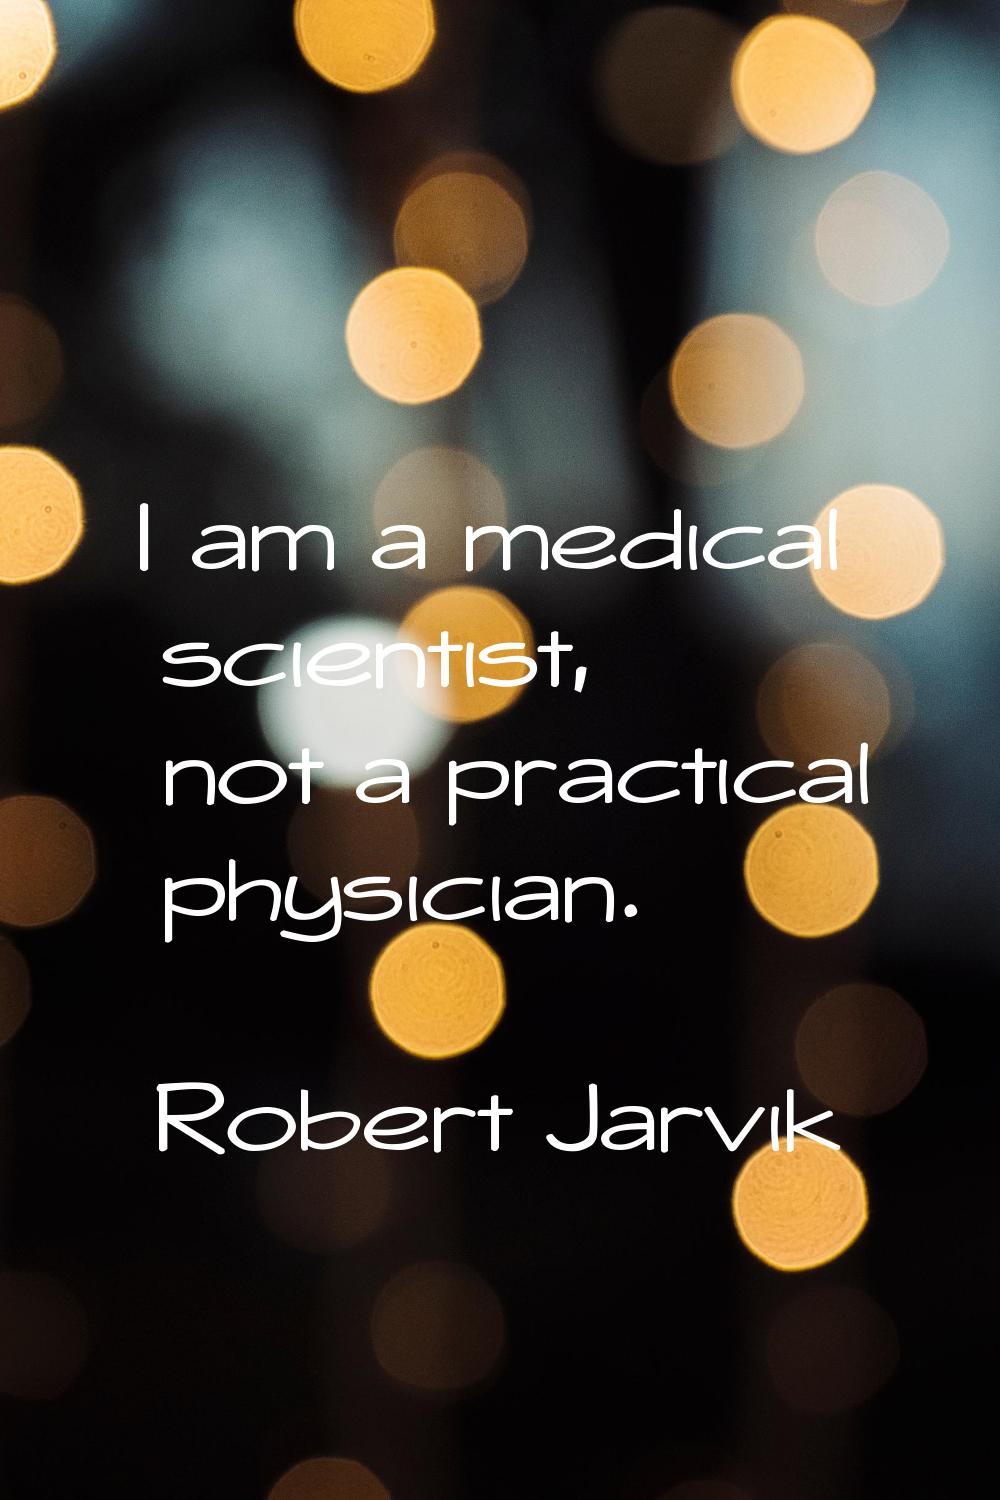 I am a medical scientist, not a practical physician.